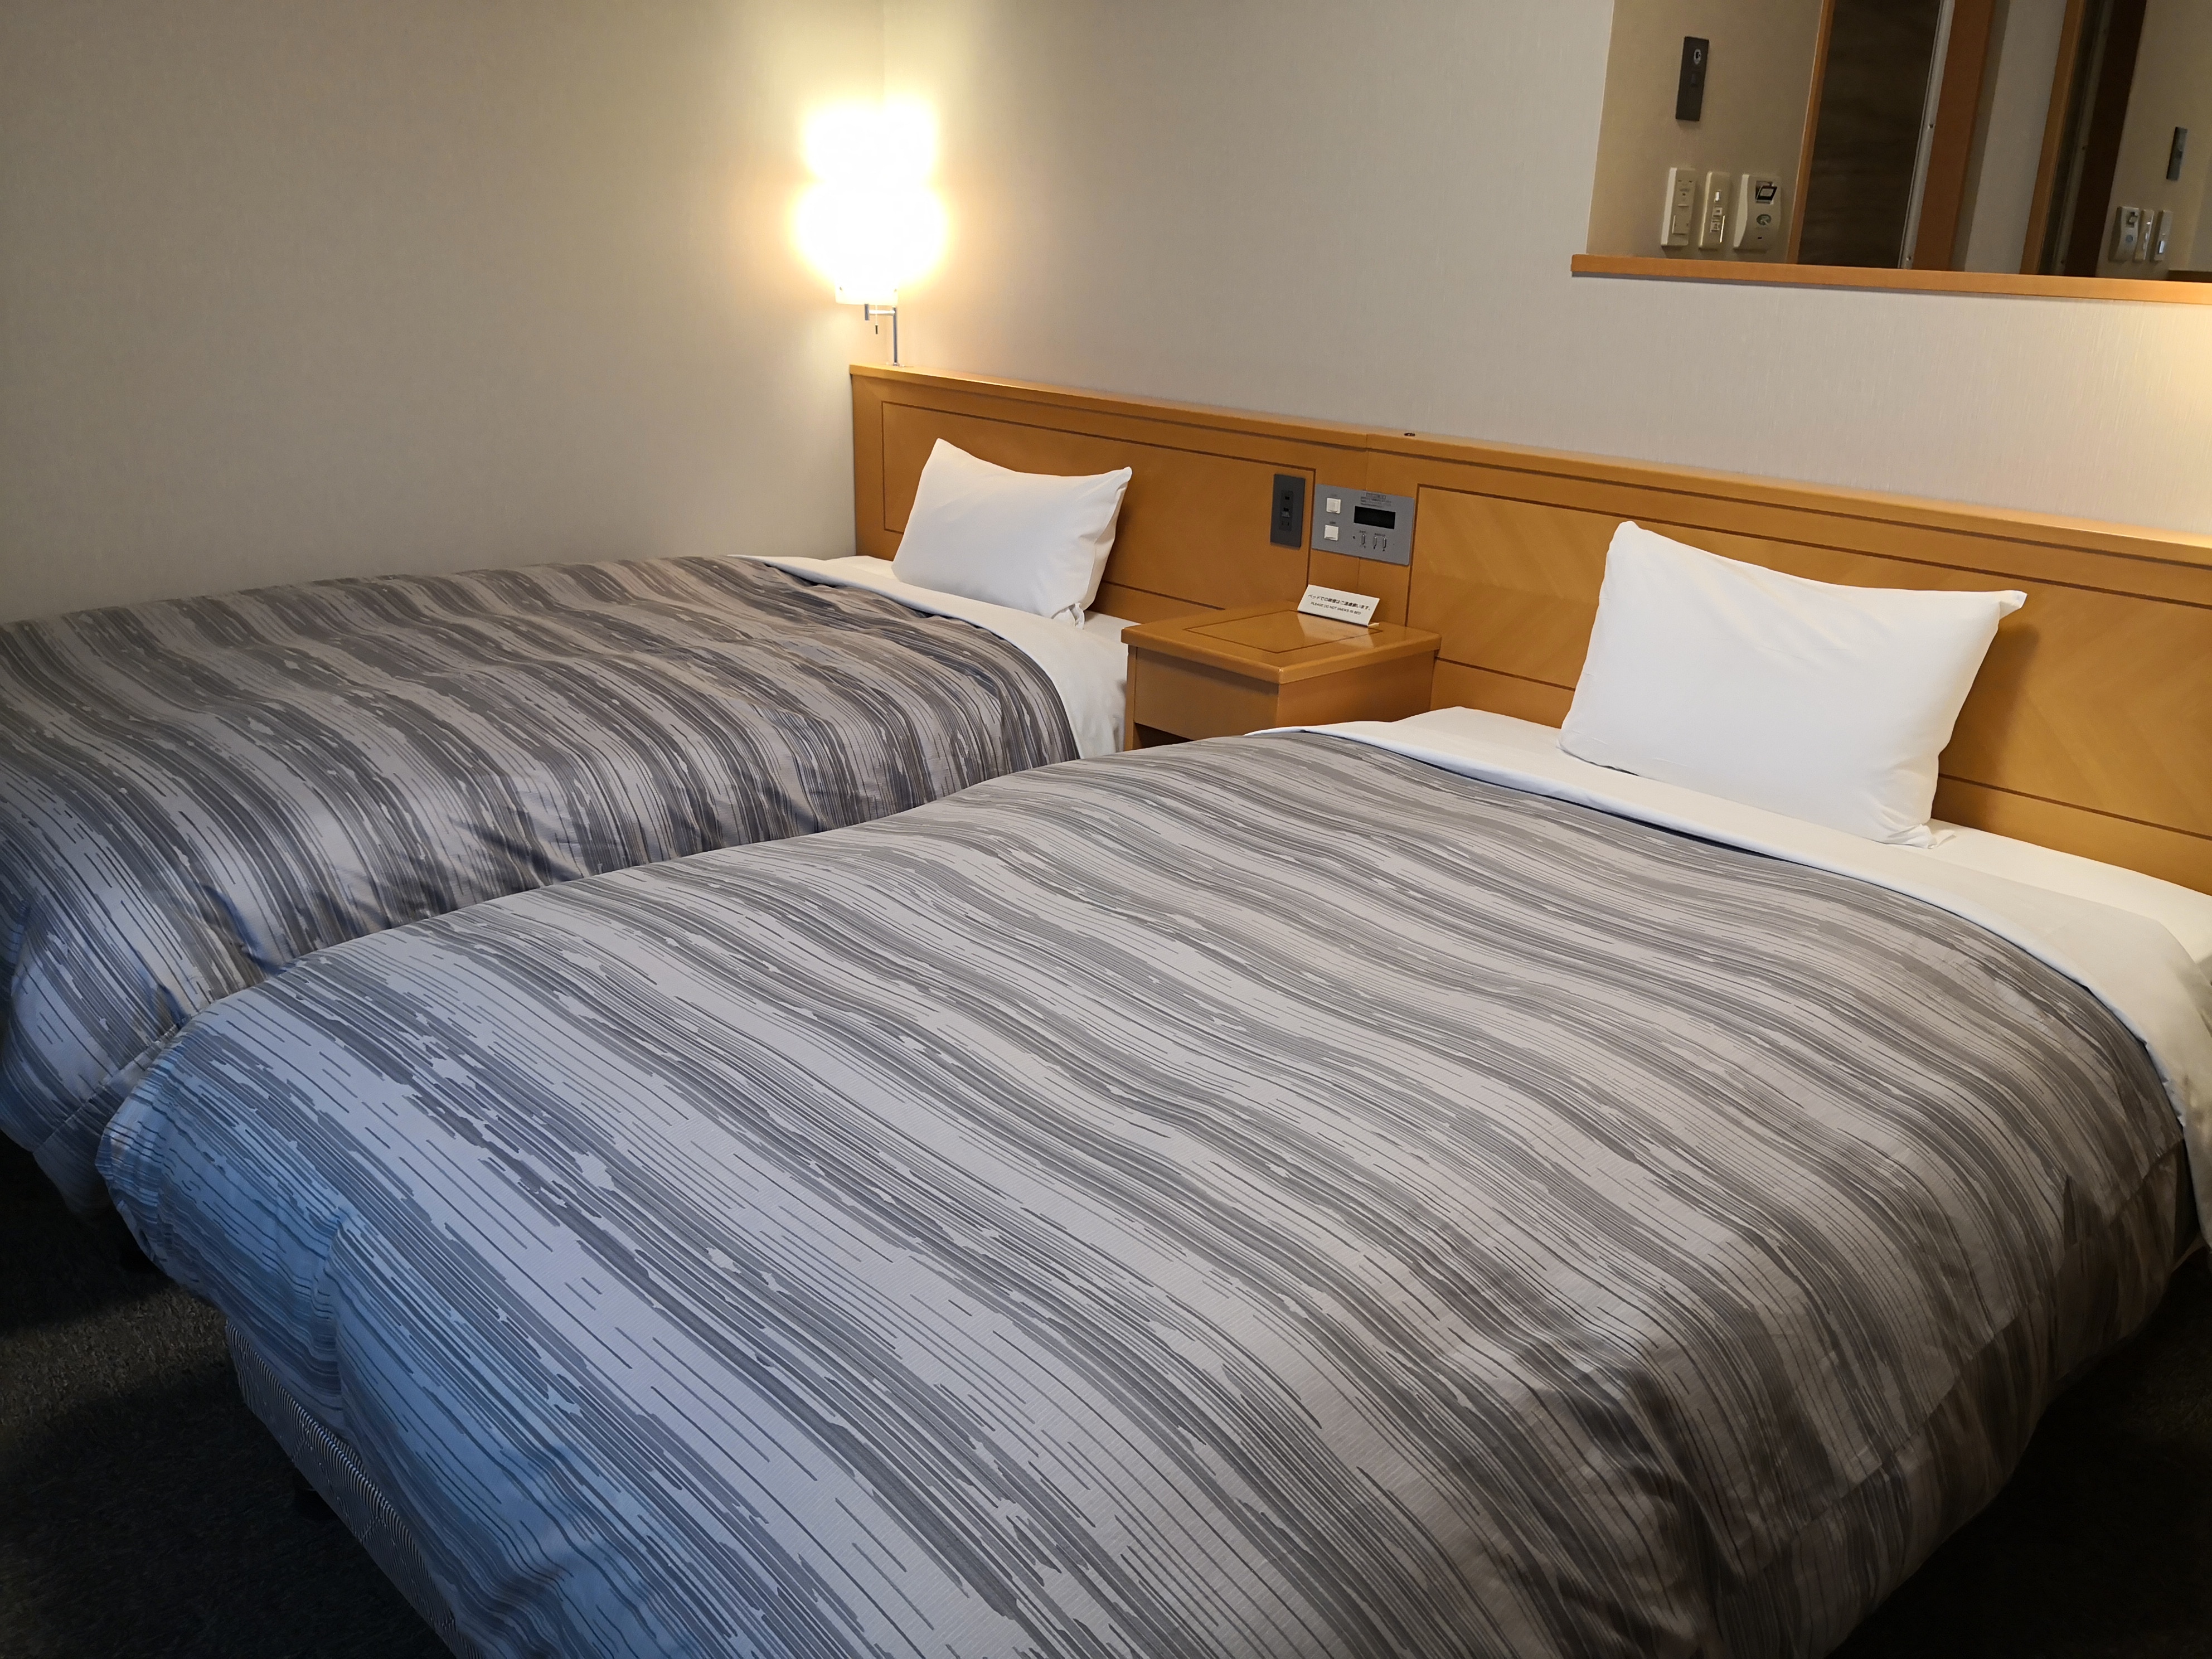 Twin room ◇ Renewal completed in August 2019 ◇ 2 120 cm wide beds, free Wi-Fi